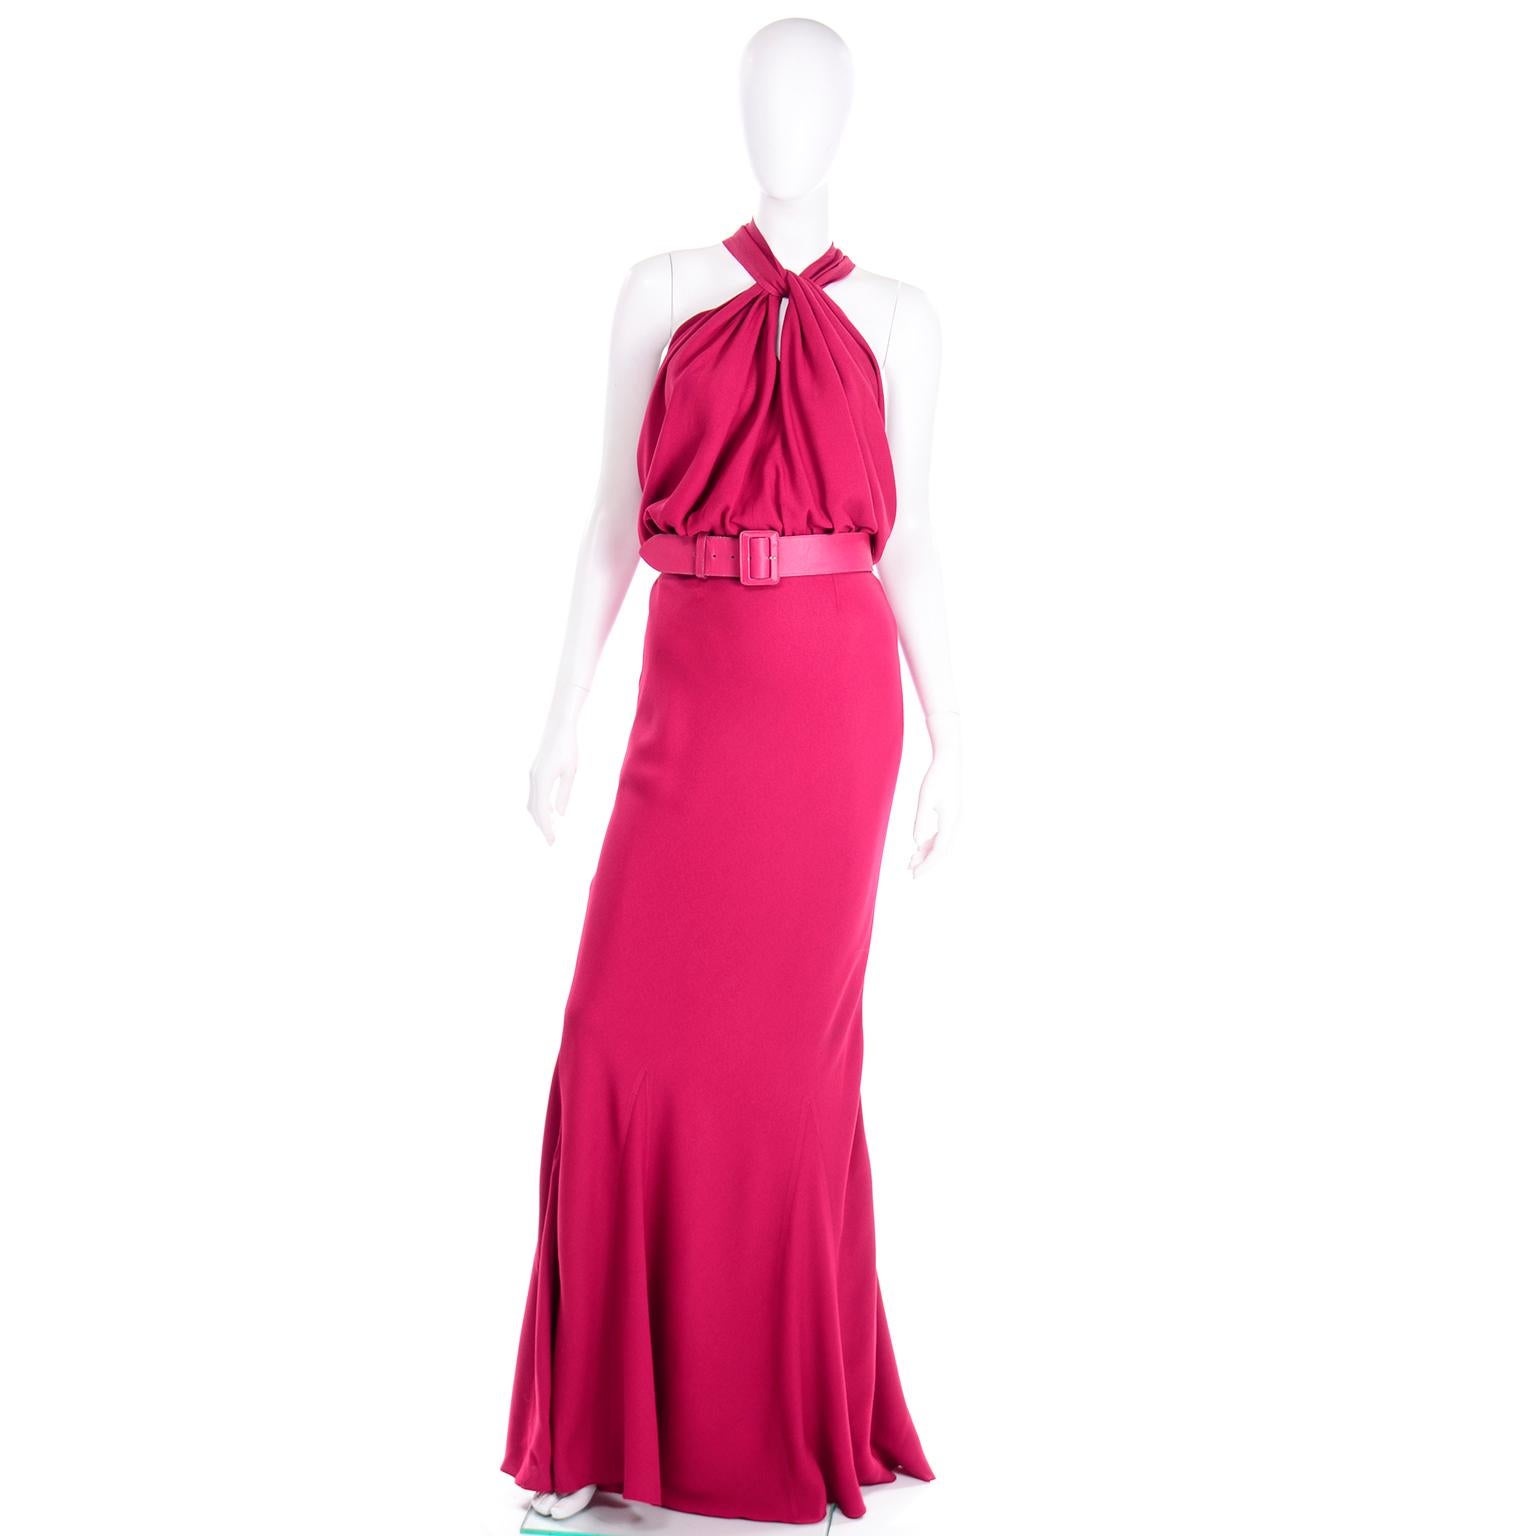 This incredible vintage 2009 John Galliano Christian Dior dress is in a stunning raspberry pink magenta crepe. This 1930's inspired dress is cut on the bias in a mermaid style silhouette. There are really unique zig zag seams along the hem of the